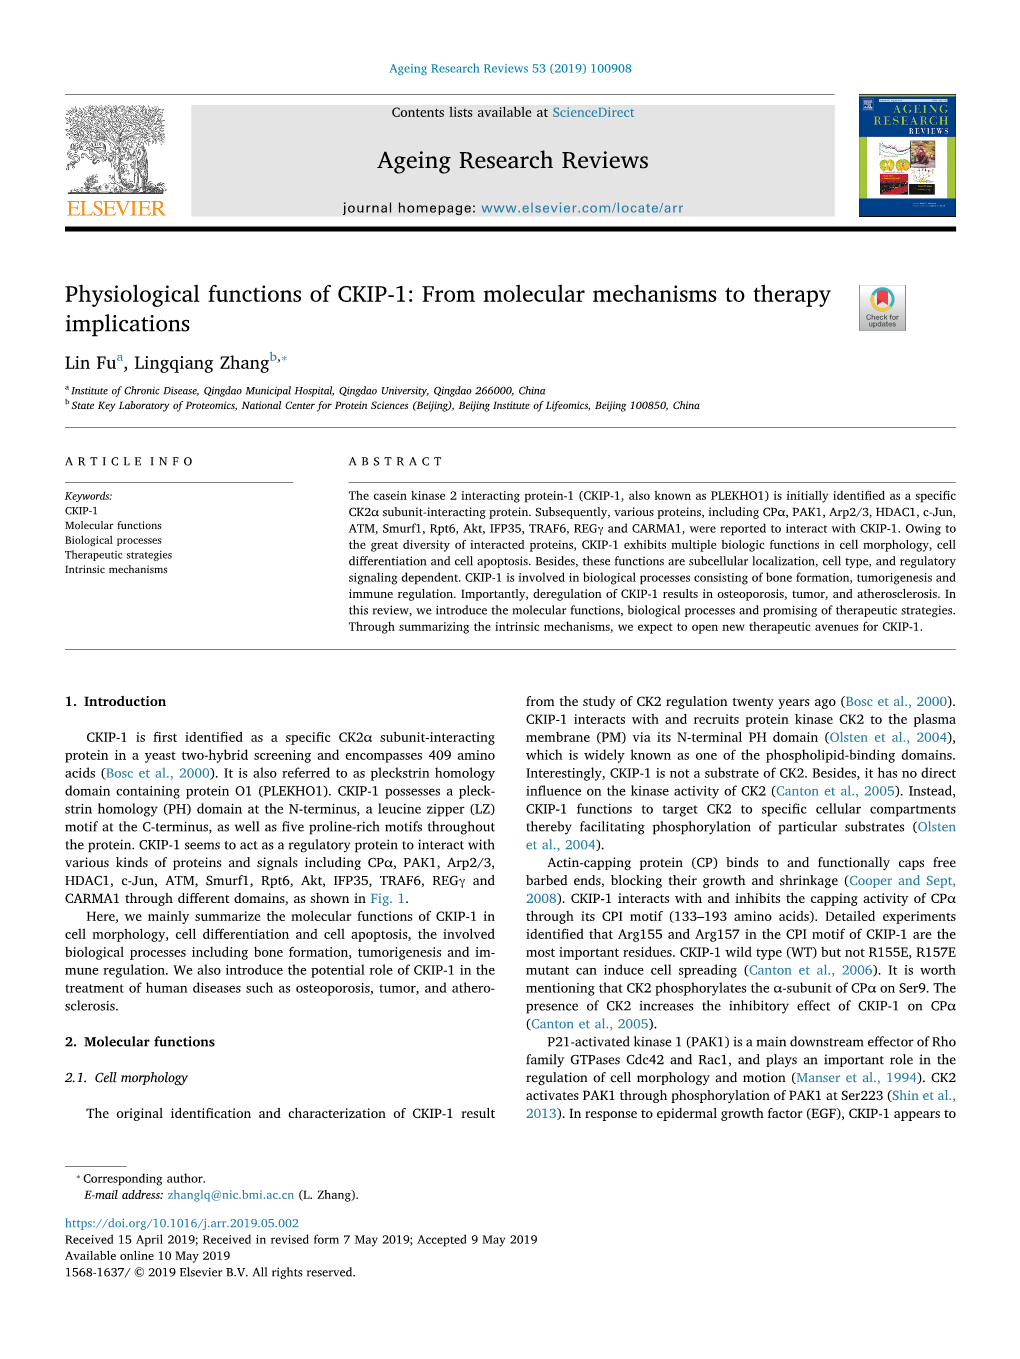 Ageing Research Reviews Physiological Functions of CKIP-1